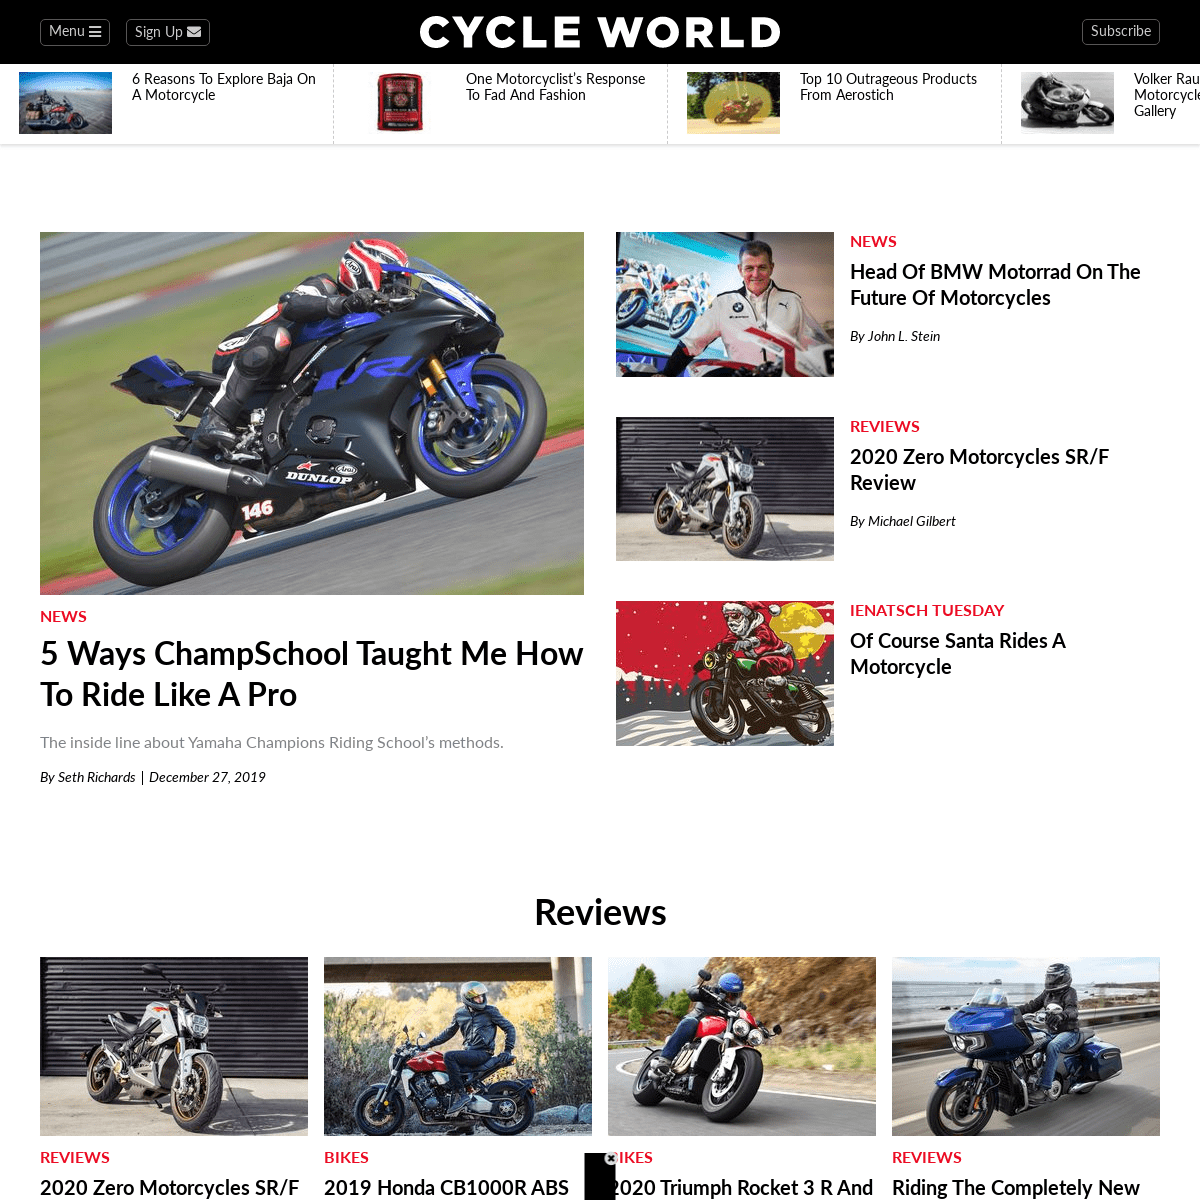 A complete backup of cycleworld.com